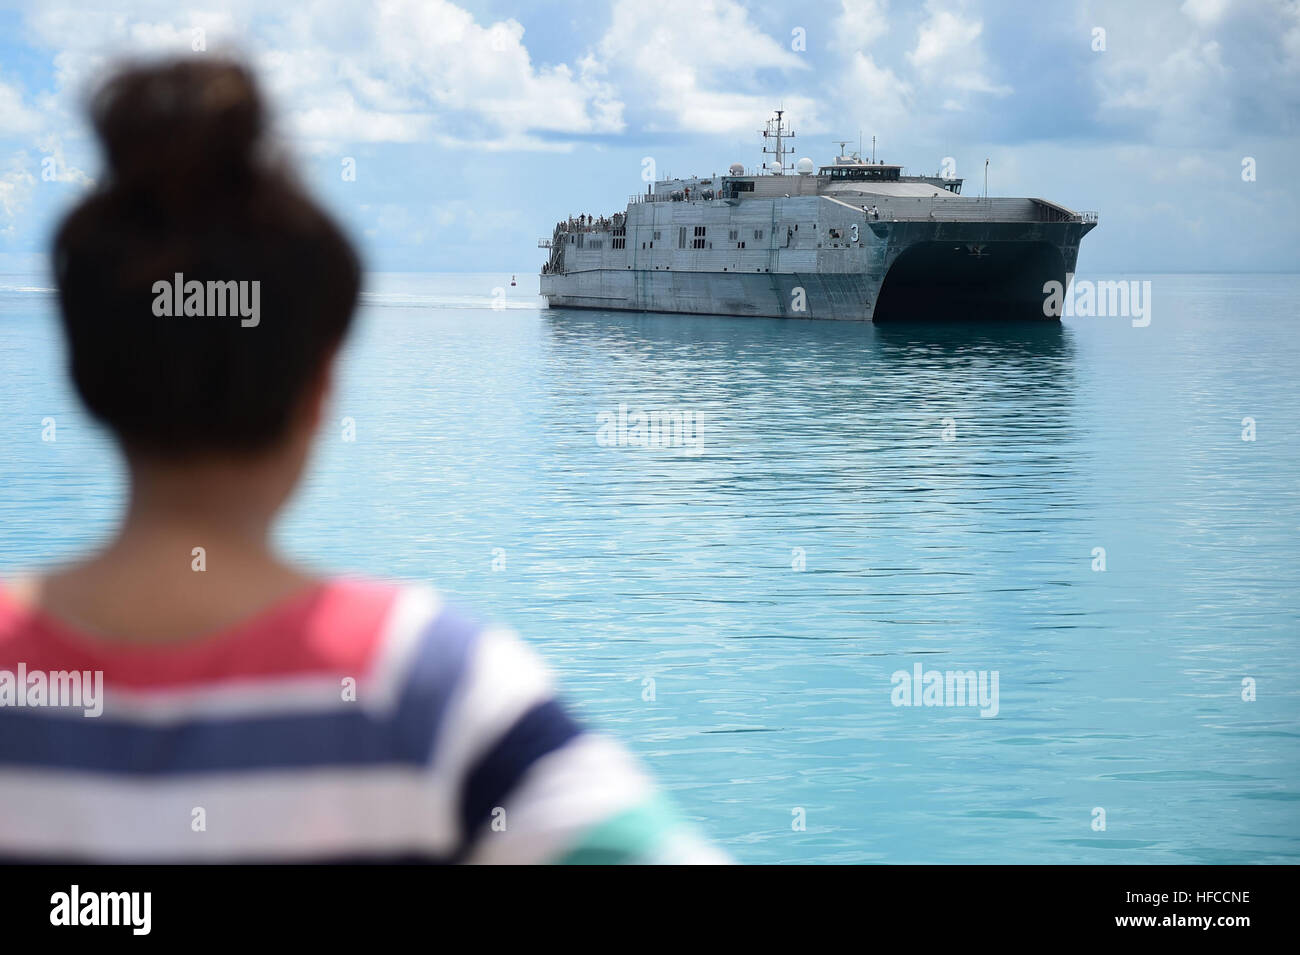 150602-N-HY254-015 TARAWA, Kiribati (June 2, 2015) An I-Kiribati girl watches as the Military Sealift Command joint high-speed vessel USNS Millinocket (JHSV 3) arrives in Tarawa, Republic of Kiribati in support of Pacific Partnership 2015.  Tarawa is an atoll and the capital of the Republic of Kiribati, in the central Pacific Ocean and is the first country Millinocket will visit during PP15.  Now in its tenth iteration, Pacific Partnership is the largest annual multilateral humanitarian assistance and disaster relief preparedness mission conducted in the Indio-Asia-Pacific region. While traini Stock Photo